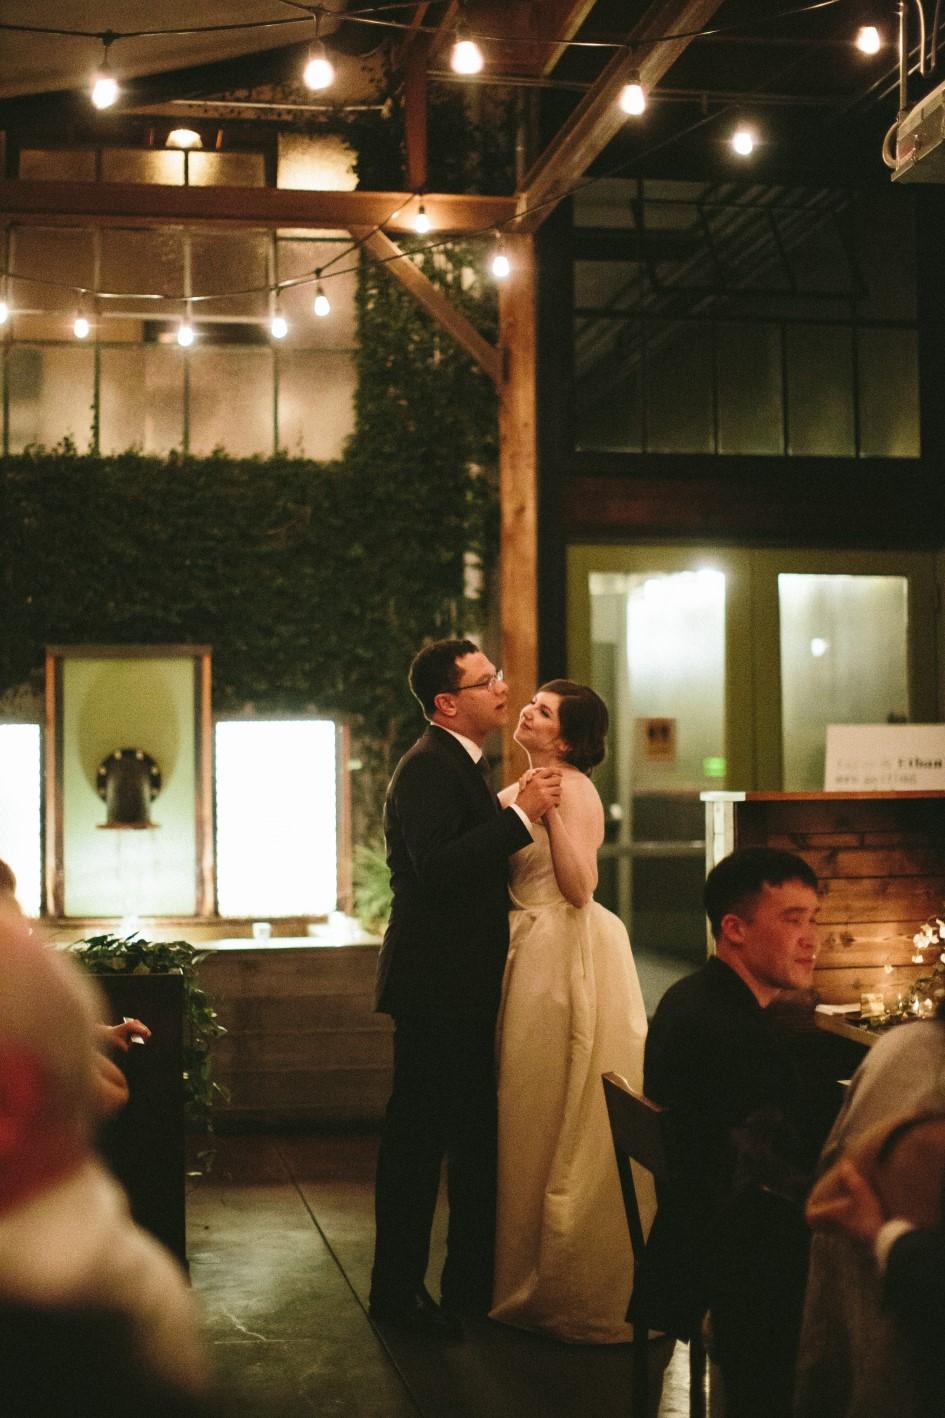 Weddings A full buyout of central kitchen can be the perfect option for a